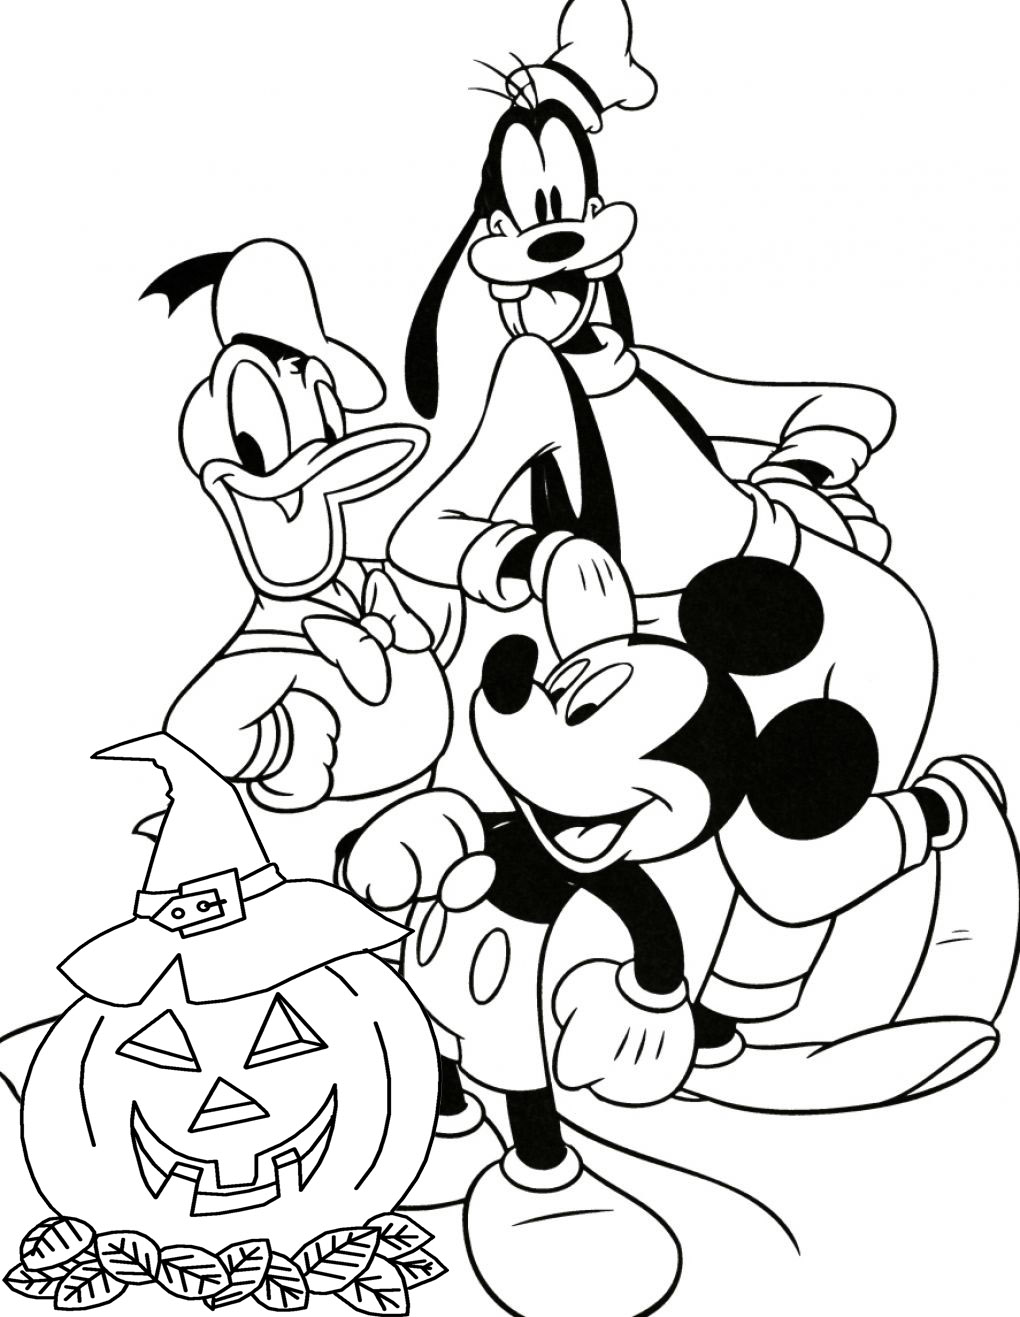 Free Disney Halloween Coloring Pages - Lovebugs and Postcards